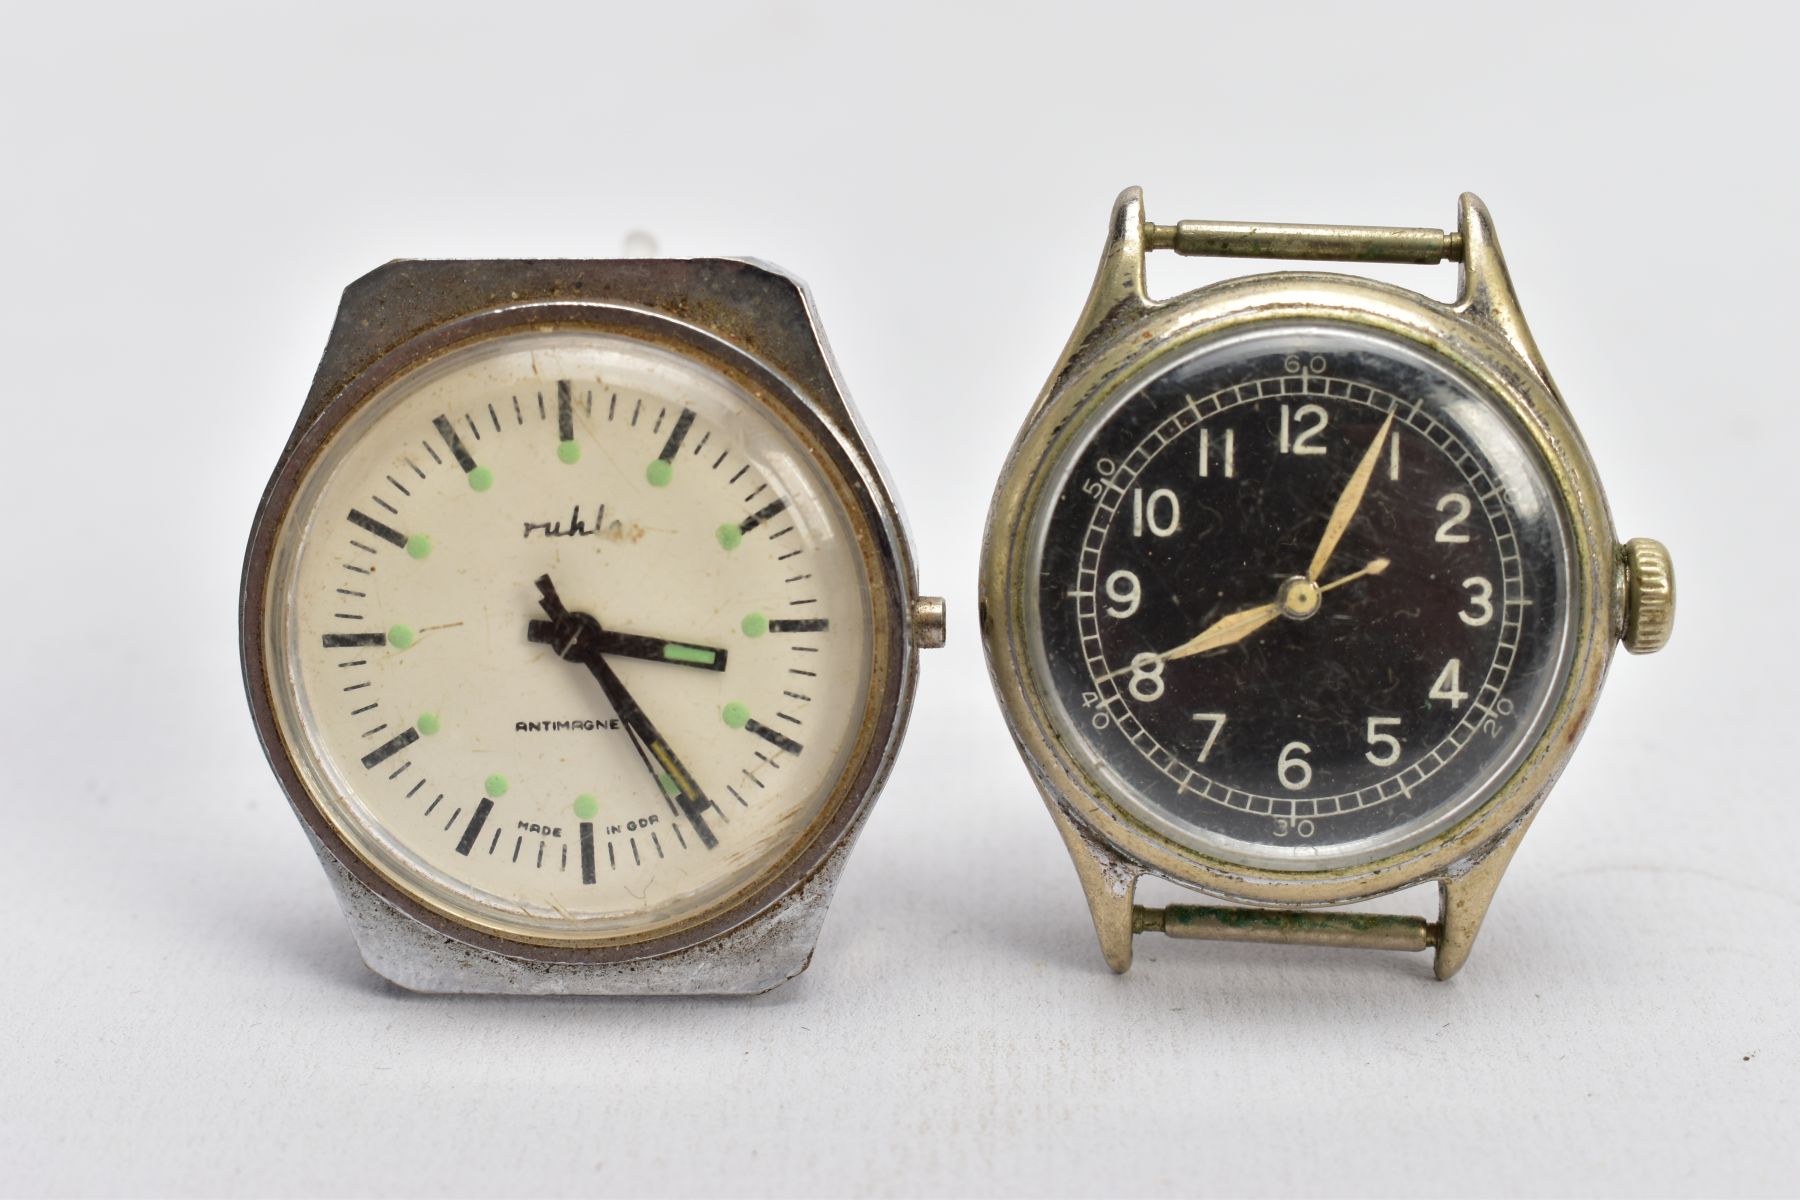 TWO GENTS WRISTWATCHES, the first with a round white dial signed 'Ruhla, Antimagnetic', baton